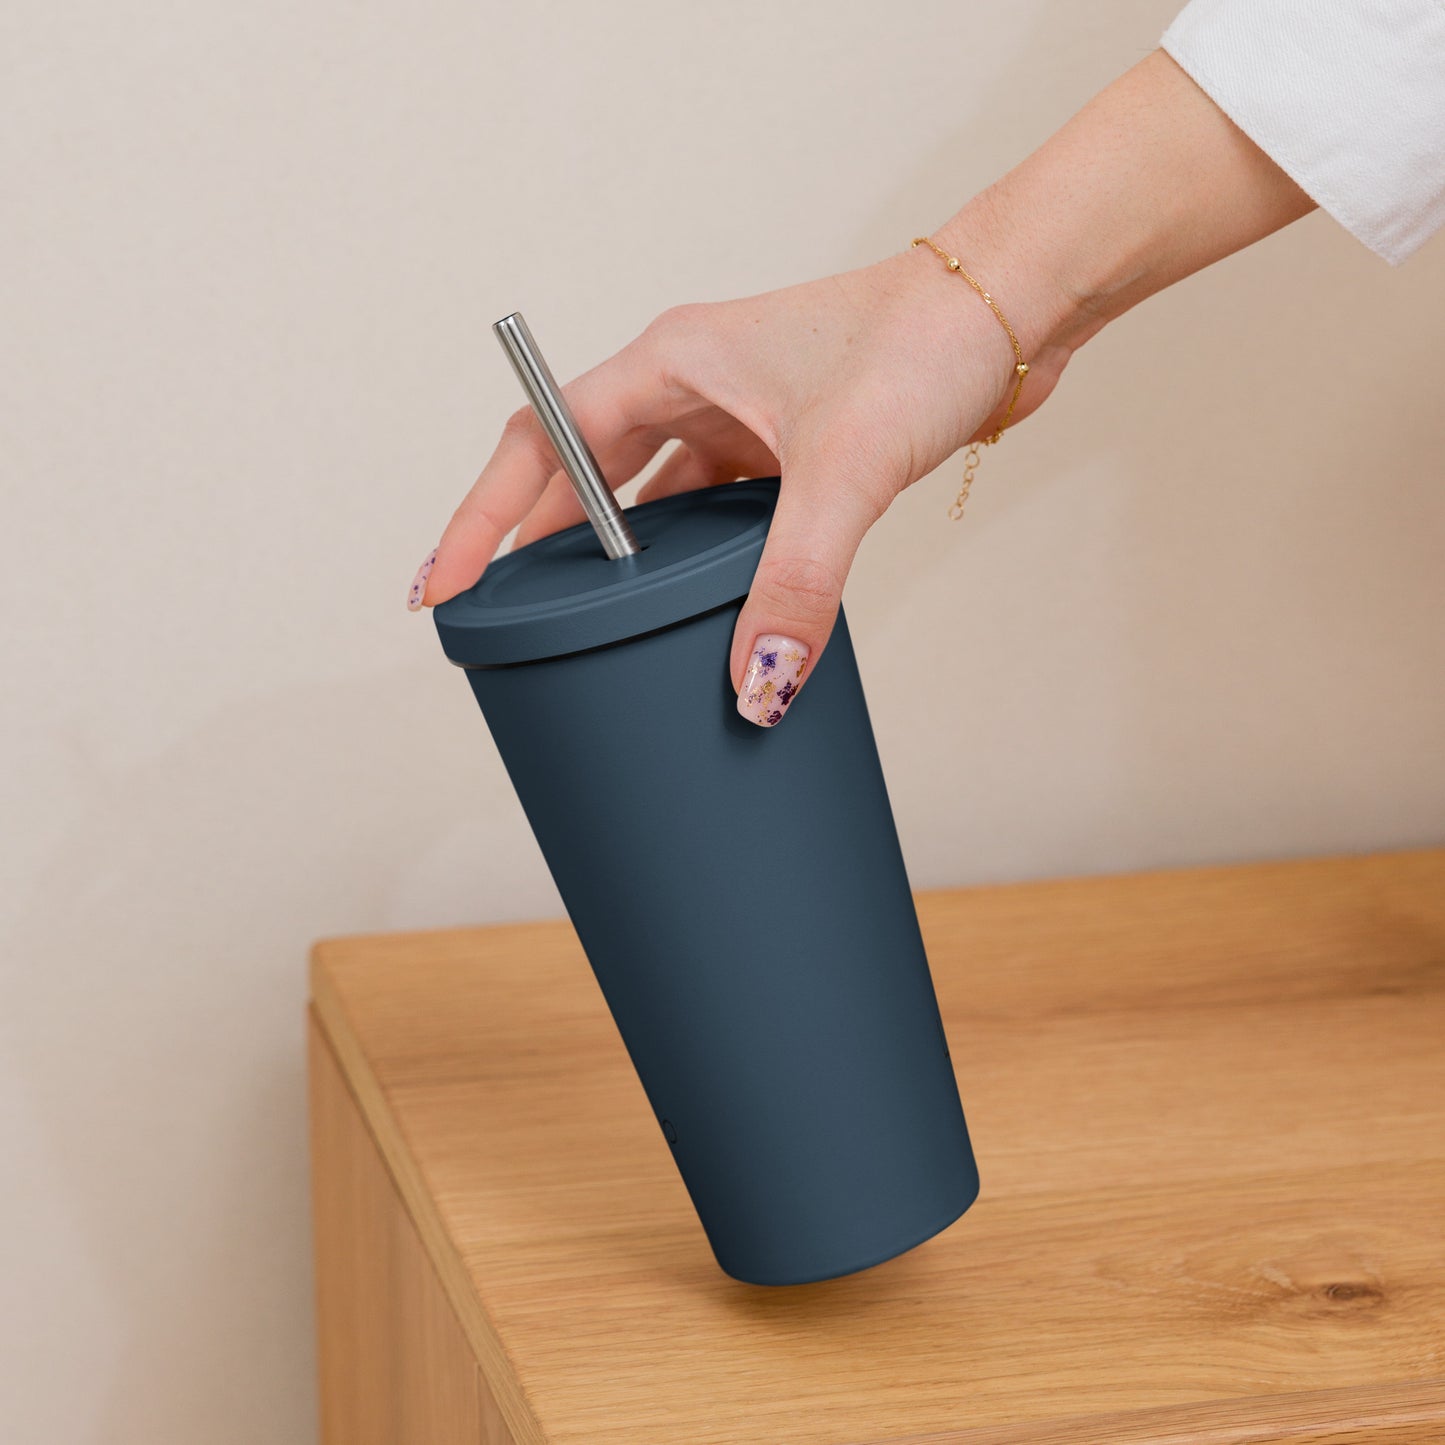 Leo Insulated tumbler with a straw